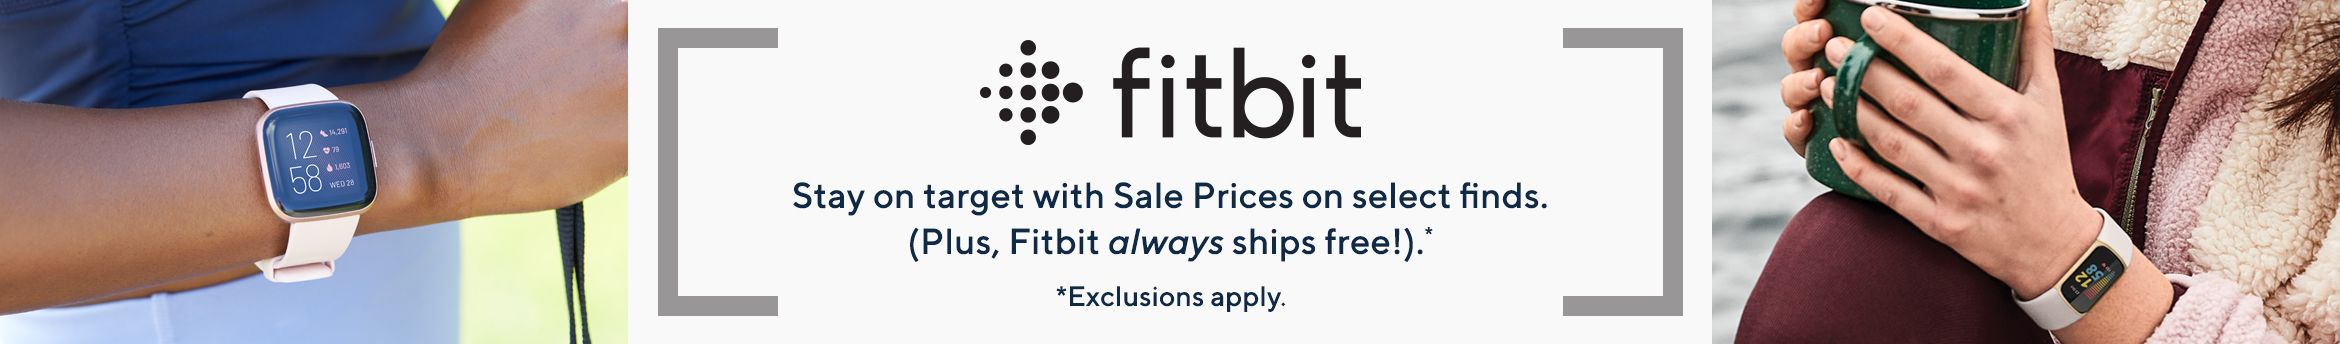 Fitbit.  Stay on target with Sale Prices on select finds. (Plus, Fitbit always ships free!).*  *Exclusions apply.